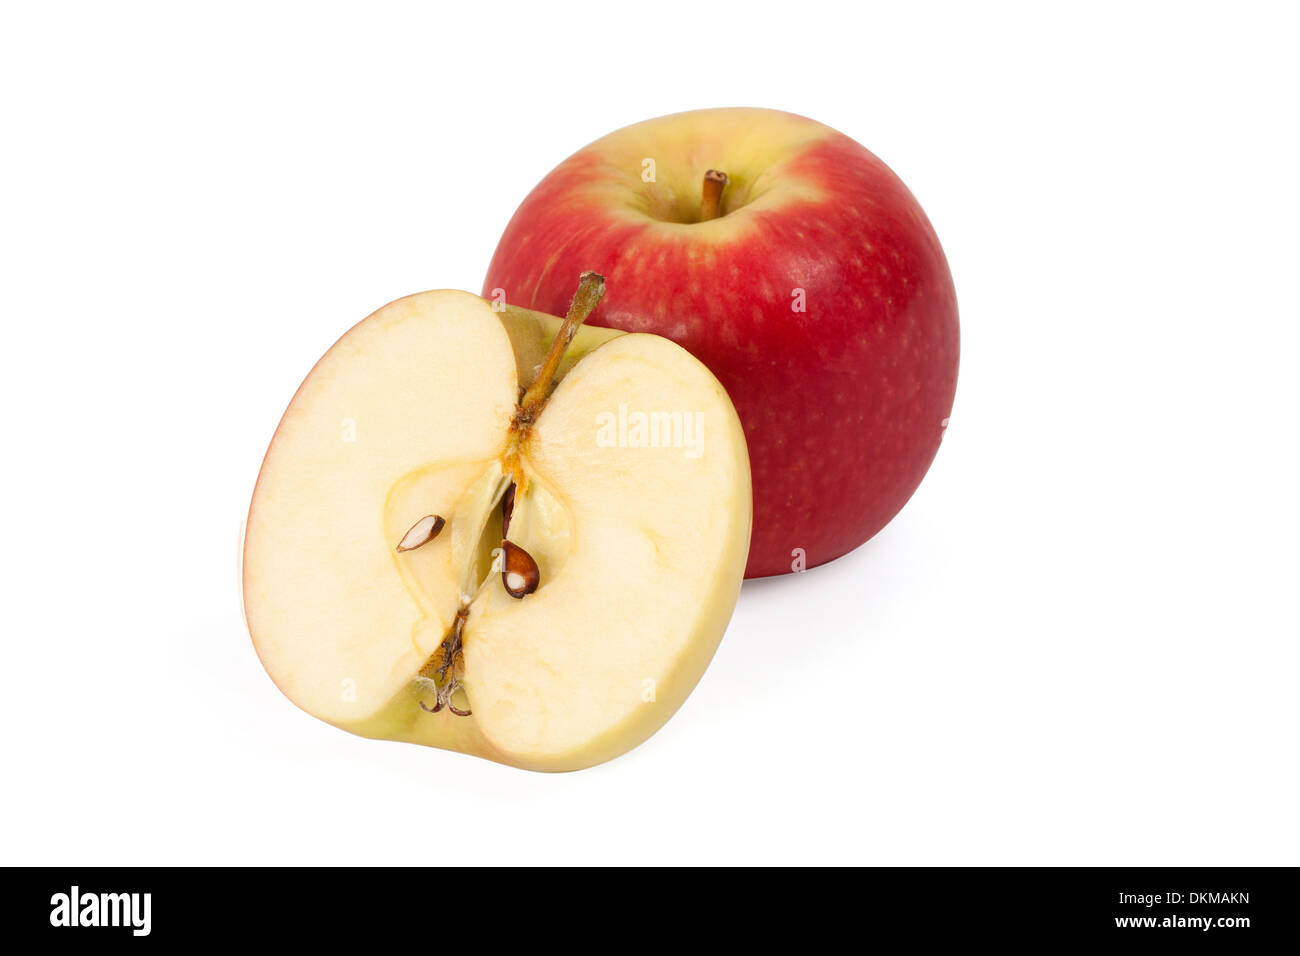 apple and half apple sliced on white background with path Stock Photo